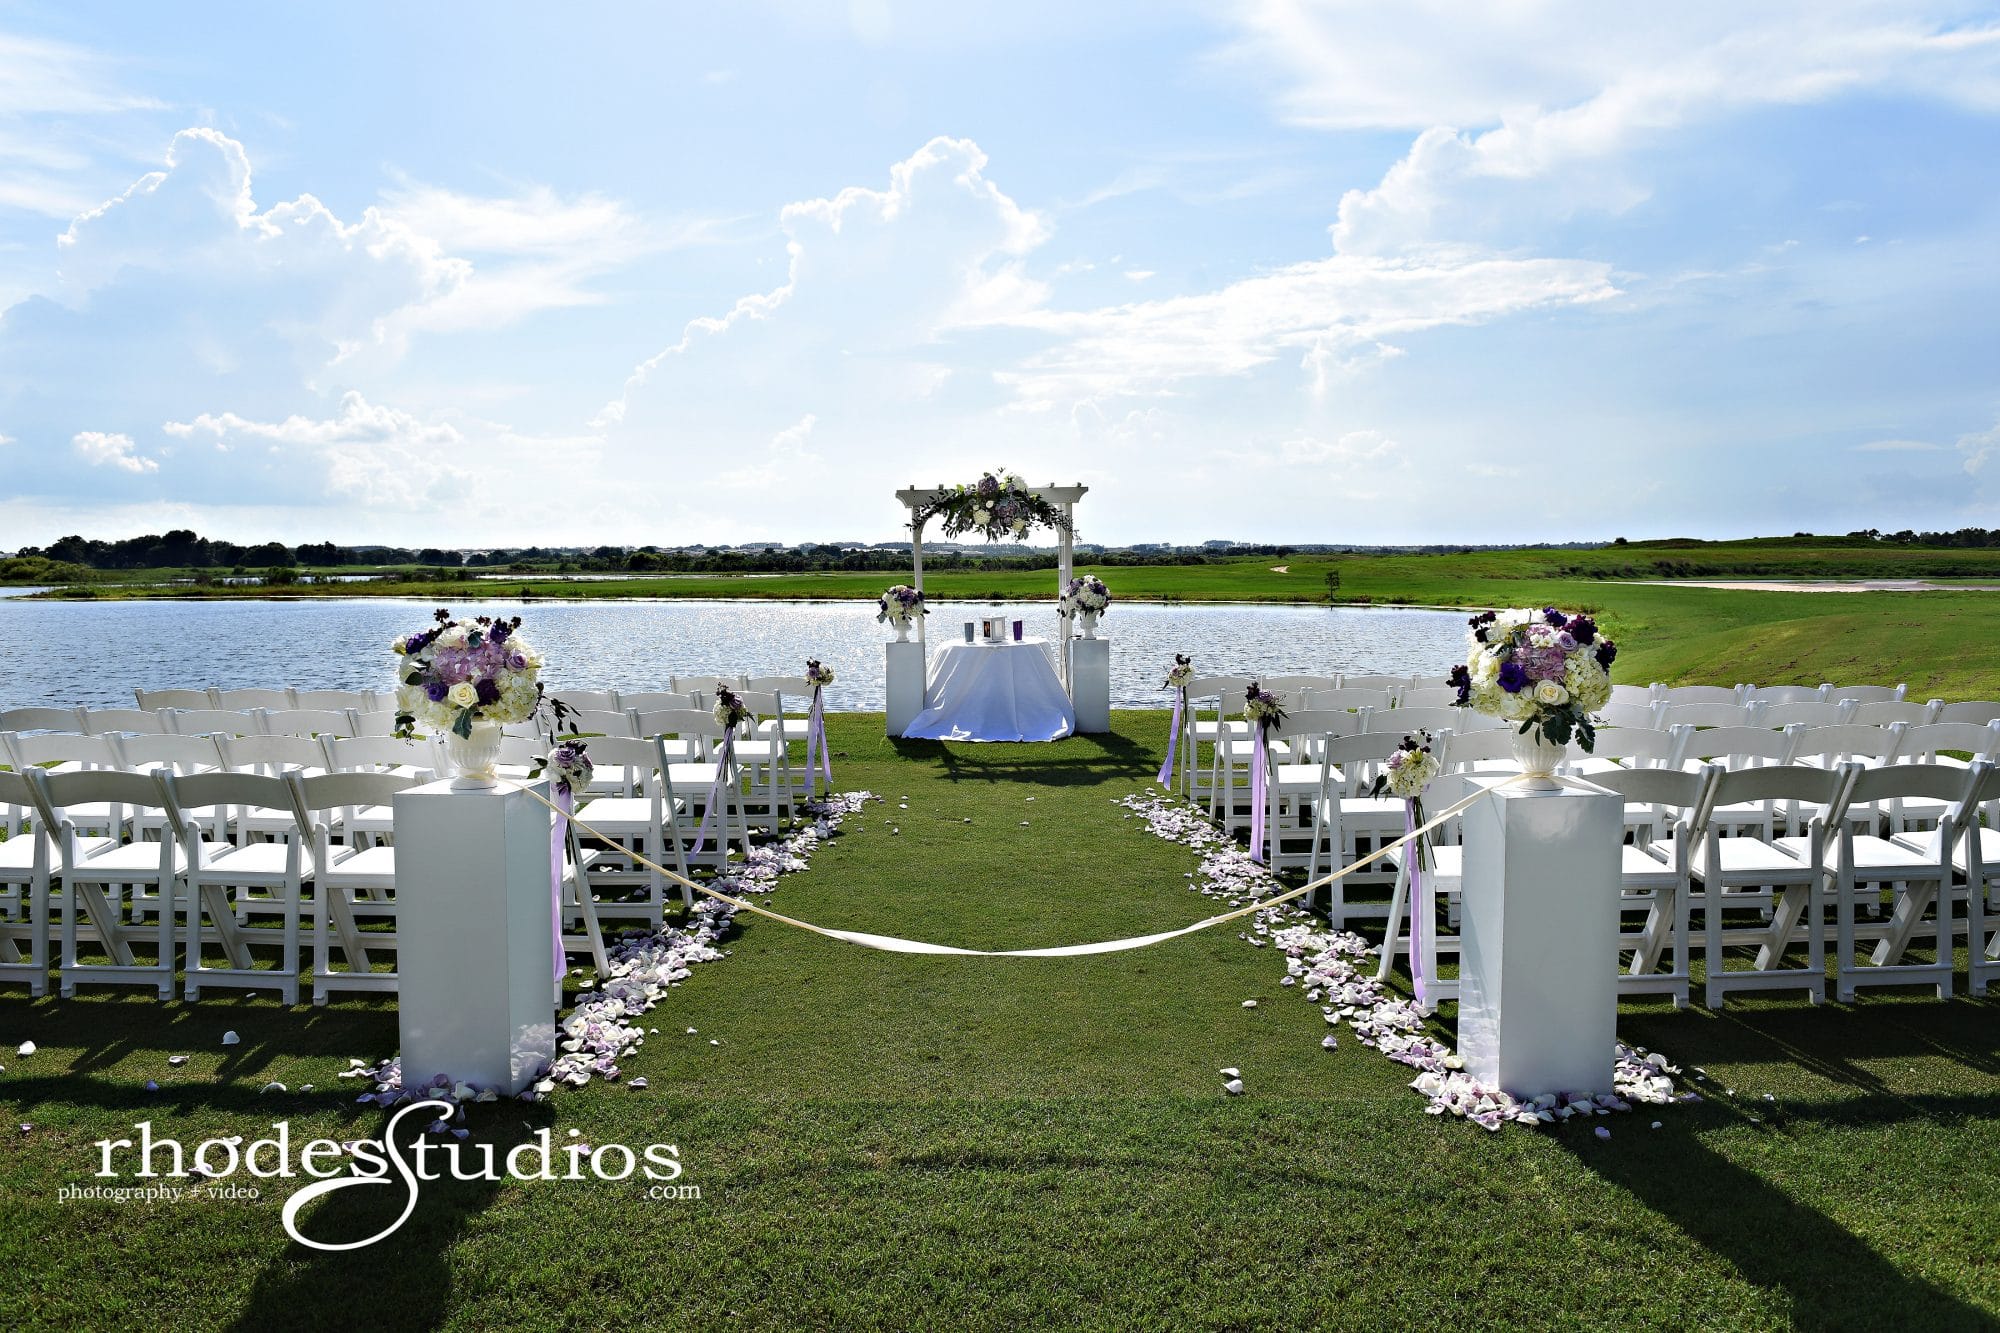 ChampionsGate Golf Club - wedding ceremony on golf course next to small lake